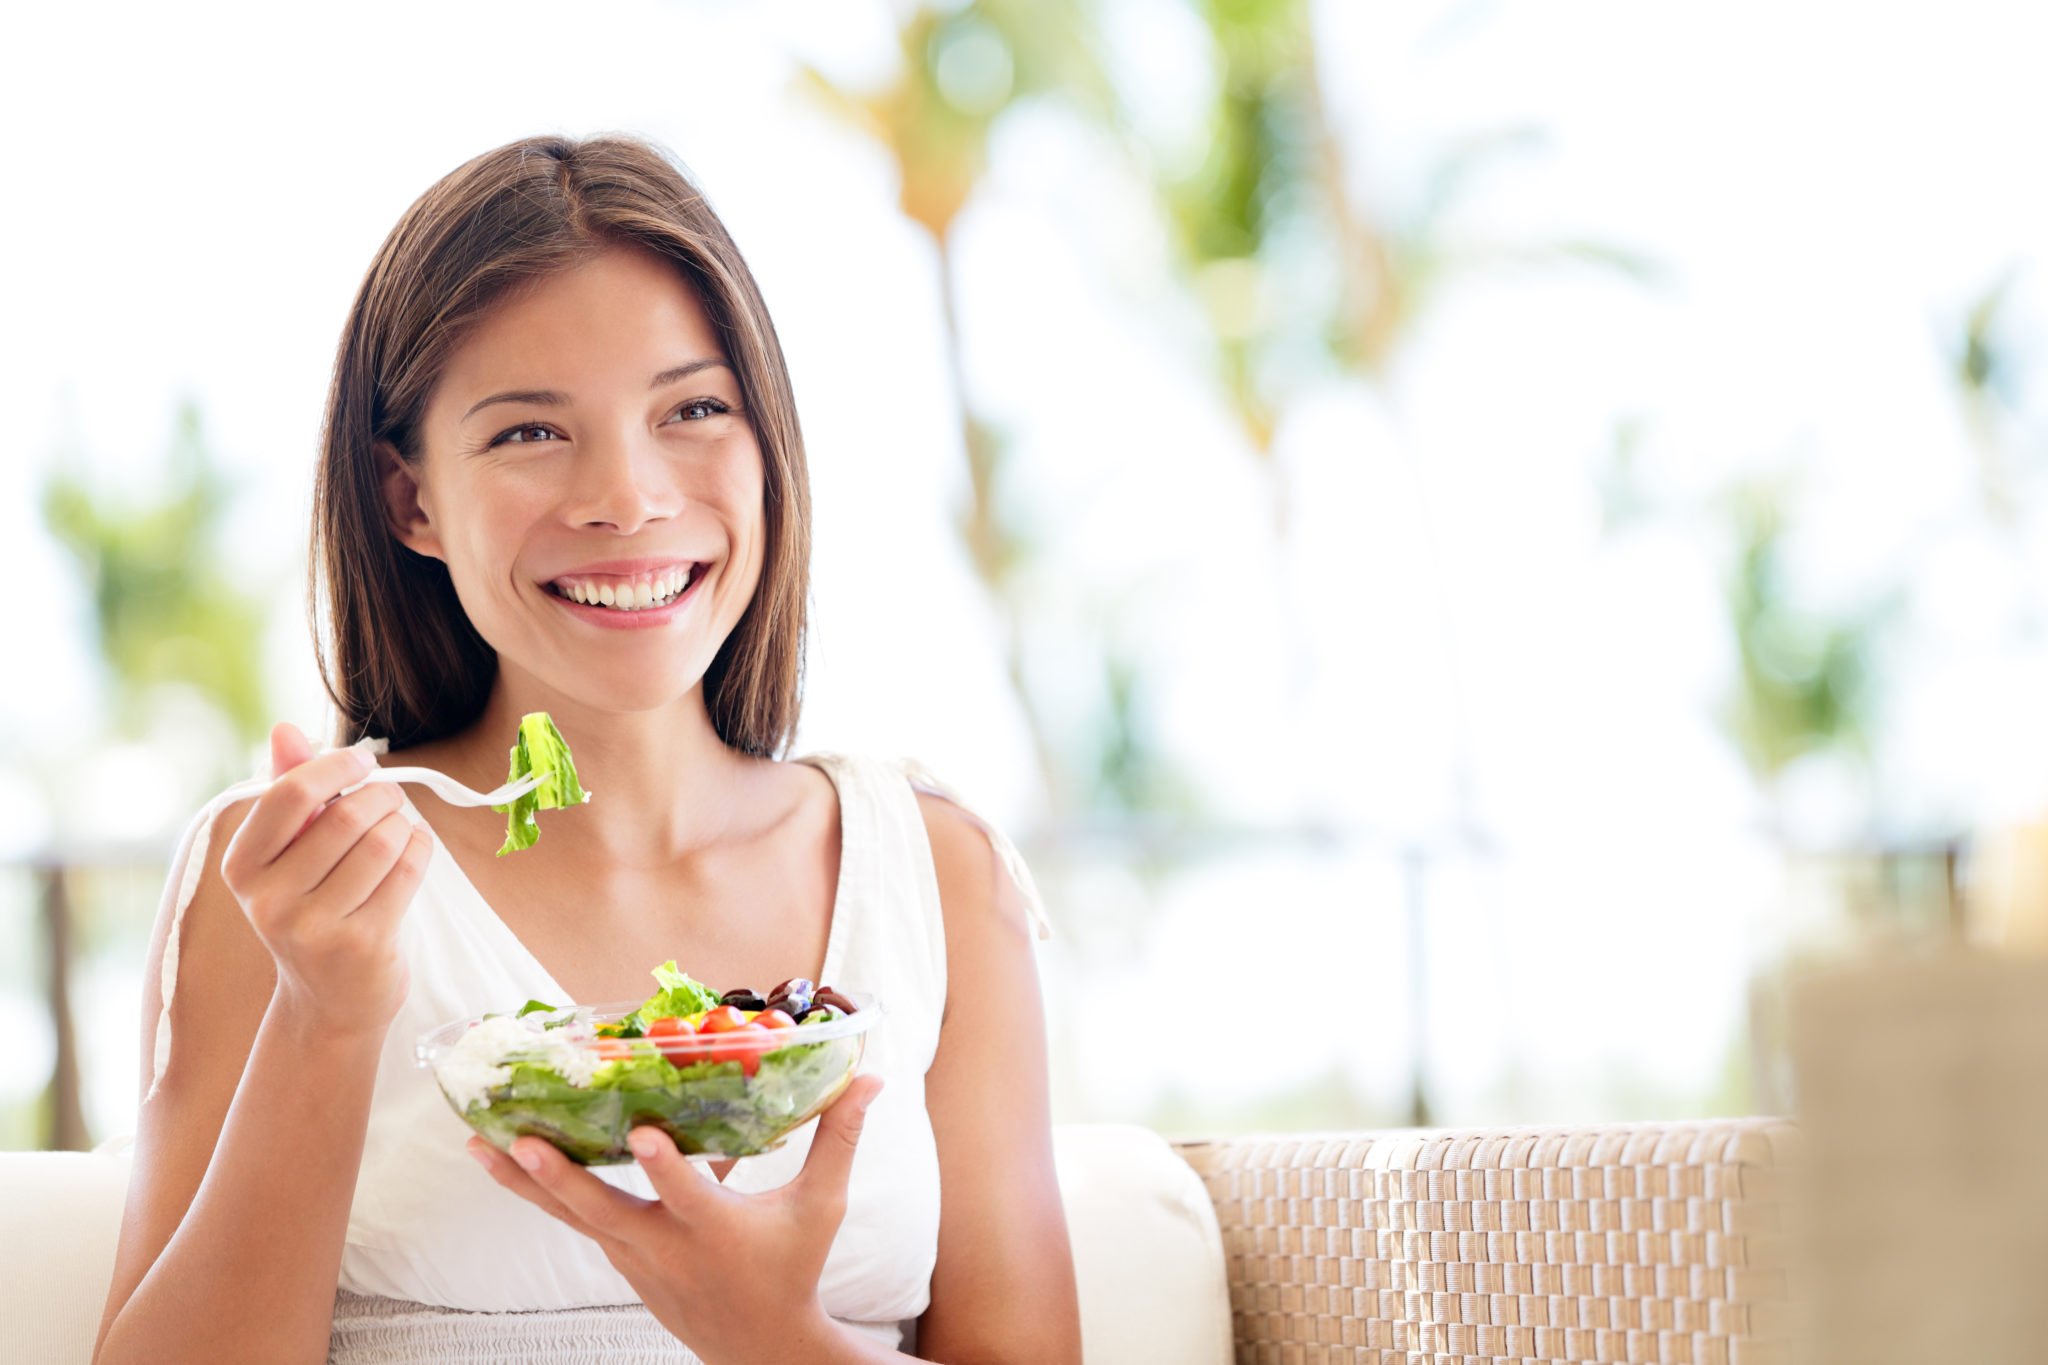 photo of woman eating a salad, good nutrition for gene expression